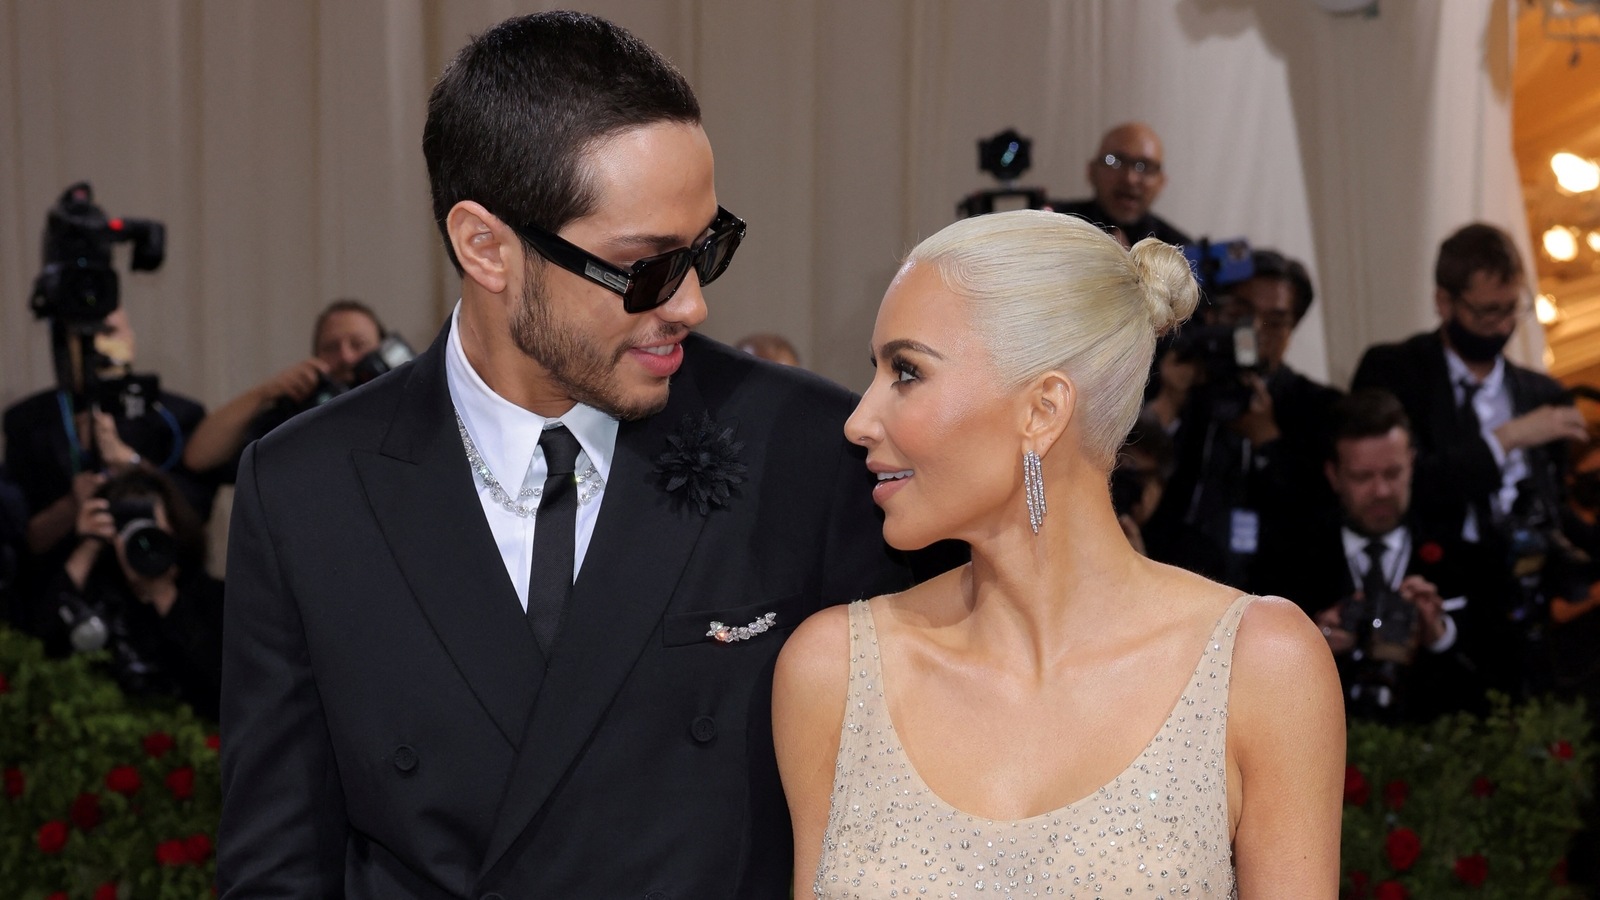 Kim Kardashian ‘had sex in front of fireplace’ with ex-Pete Davidson following her grandma’s advice